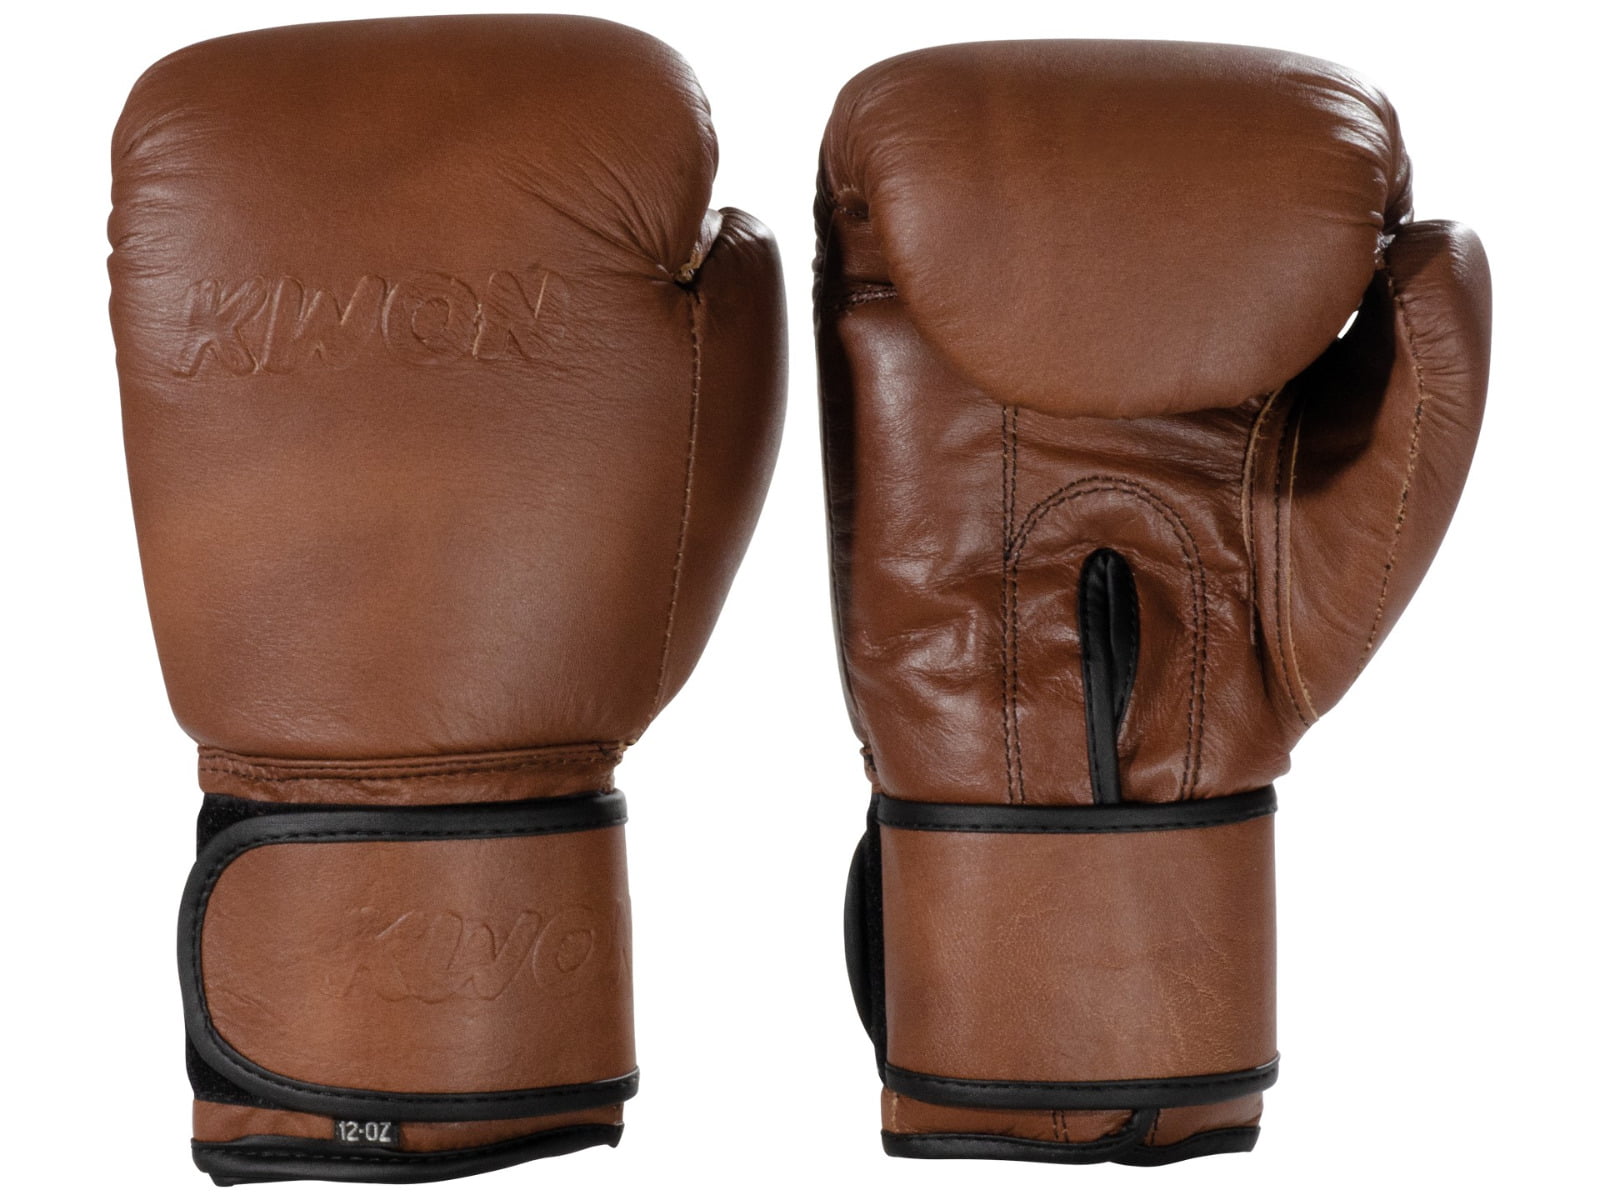 leather vintage / retro brown boxing gloves 3